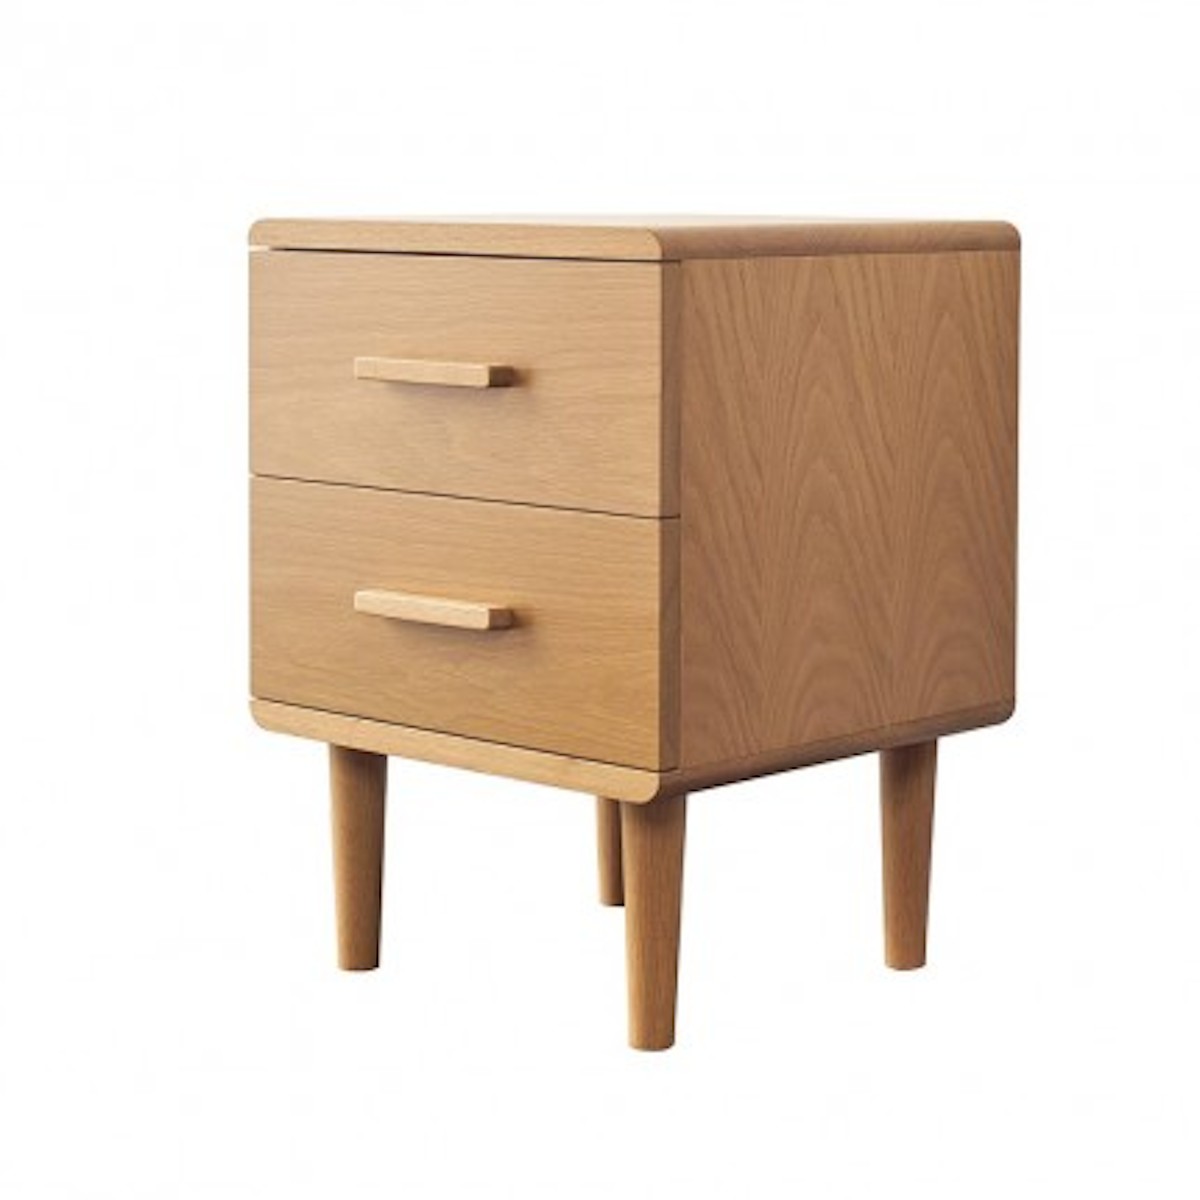 Series 55 Bedside Table